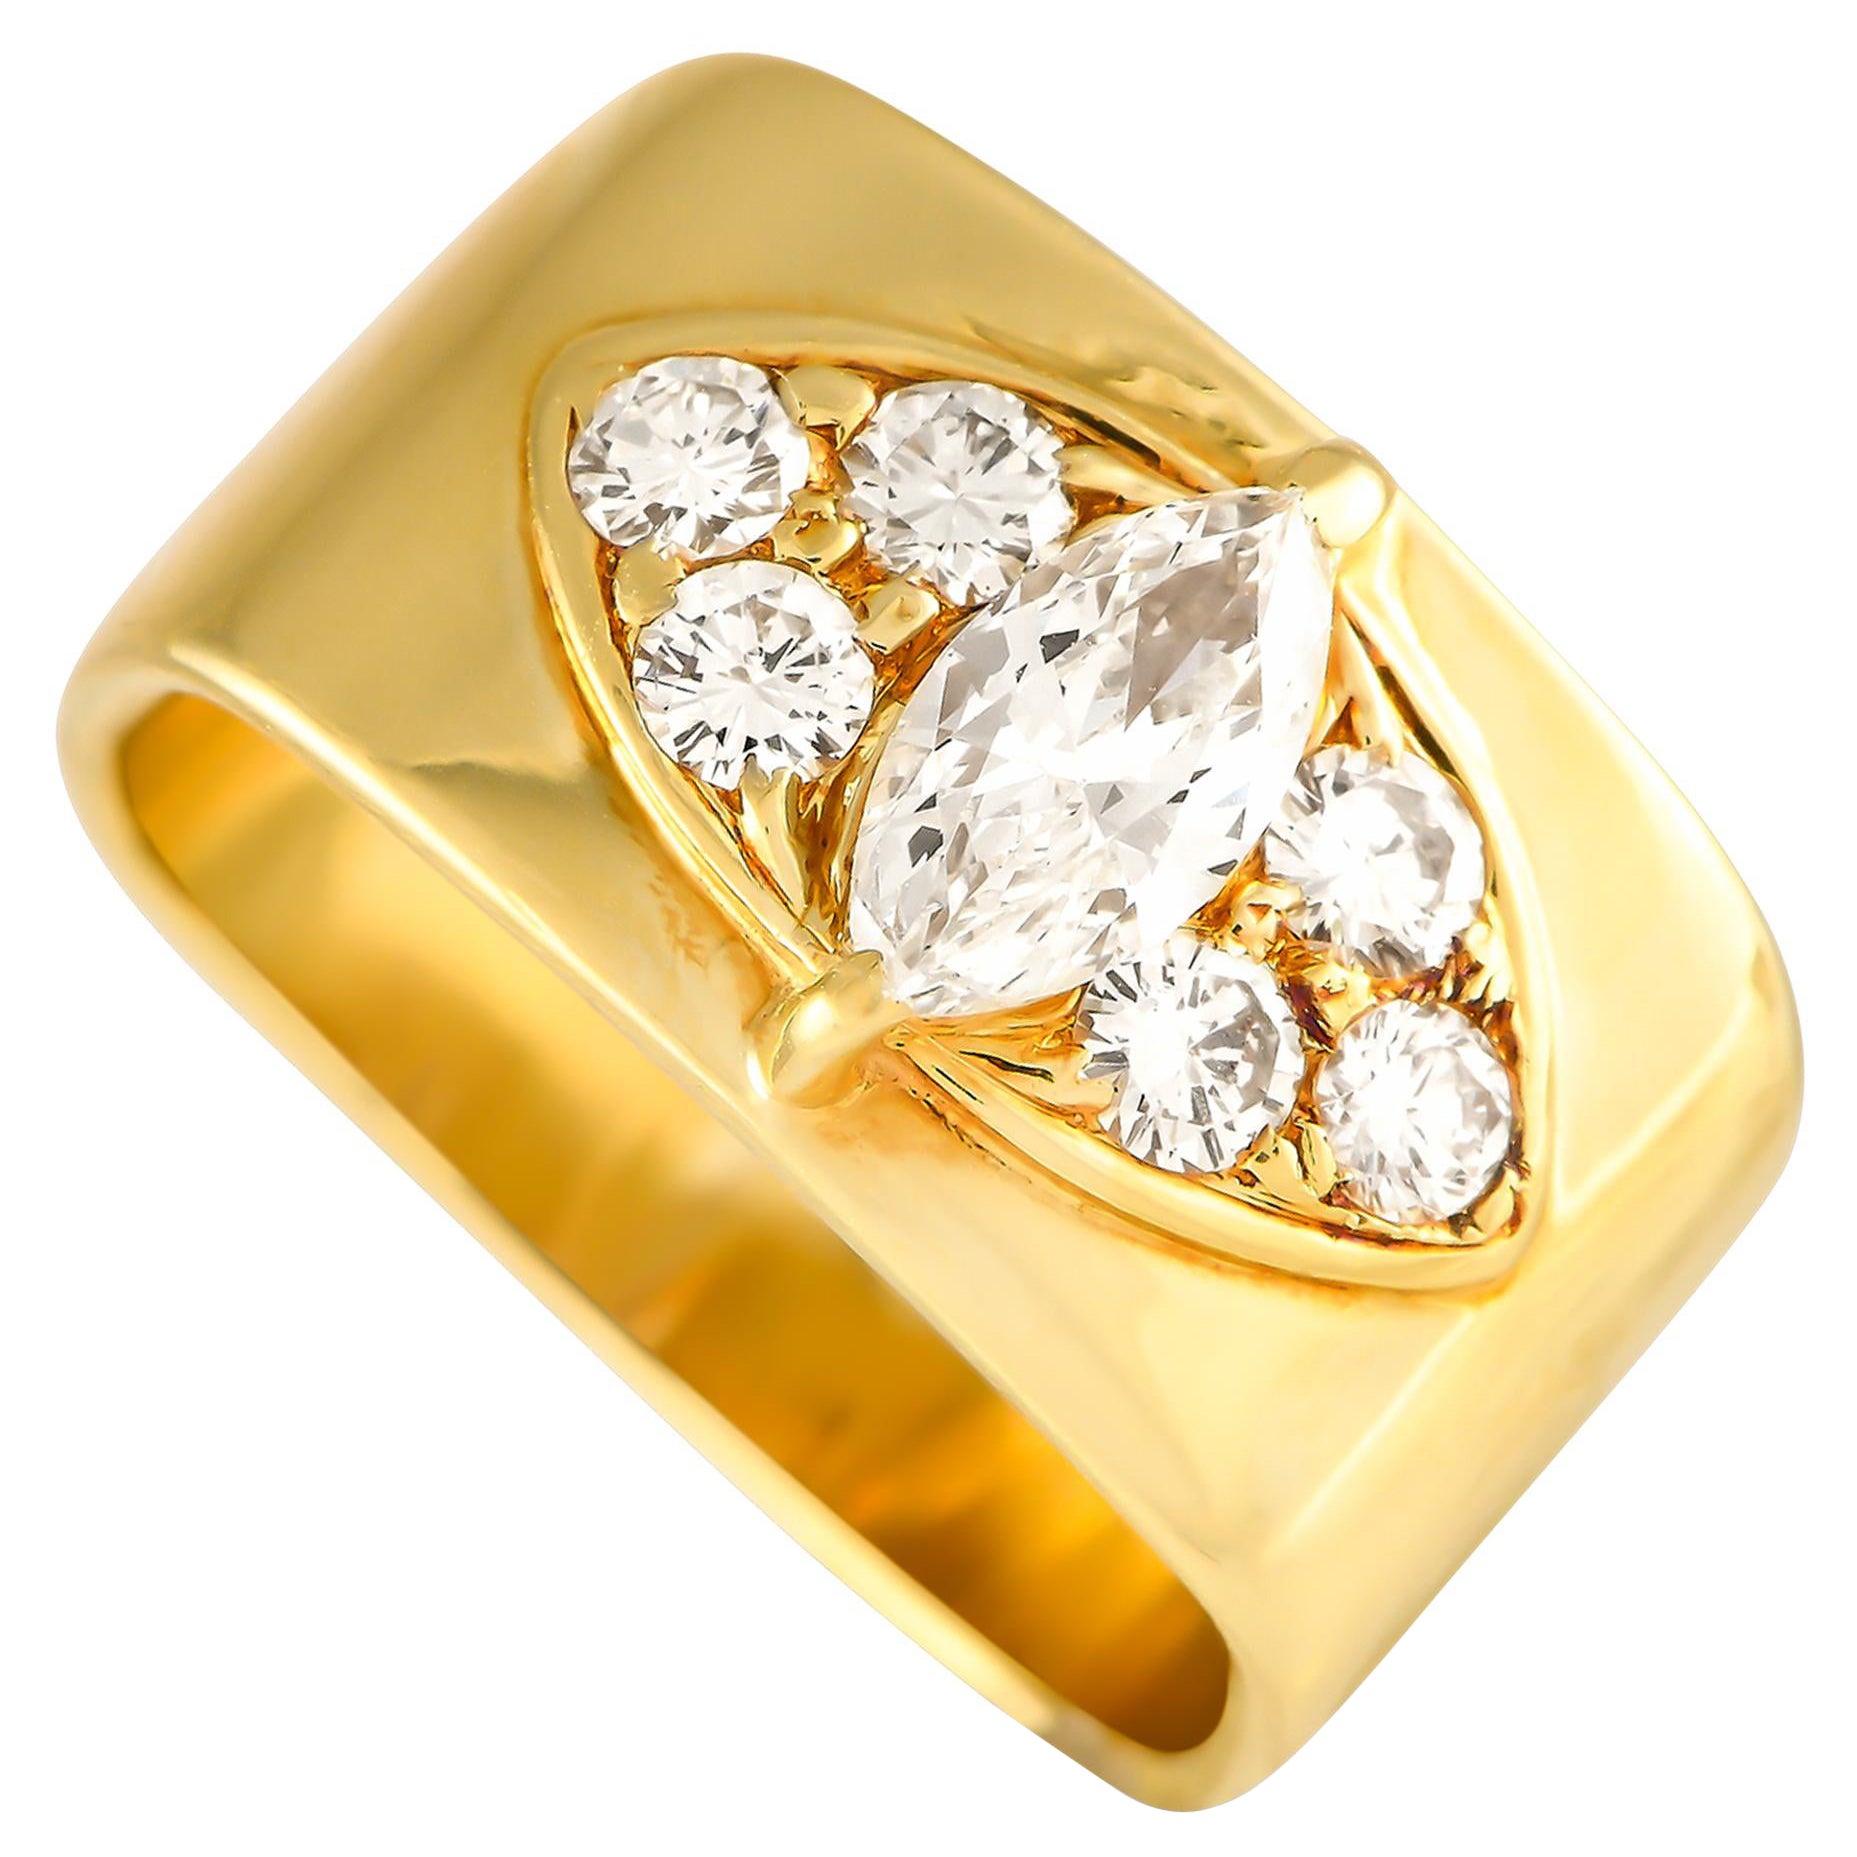 14K Yellow Gold 0.60ct Diamond Ring MF15-020124 For Sale